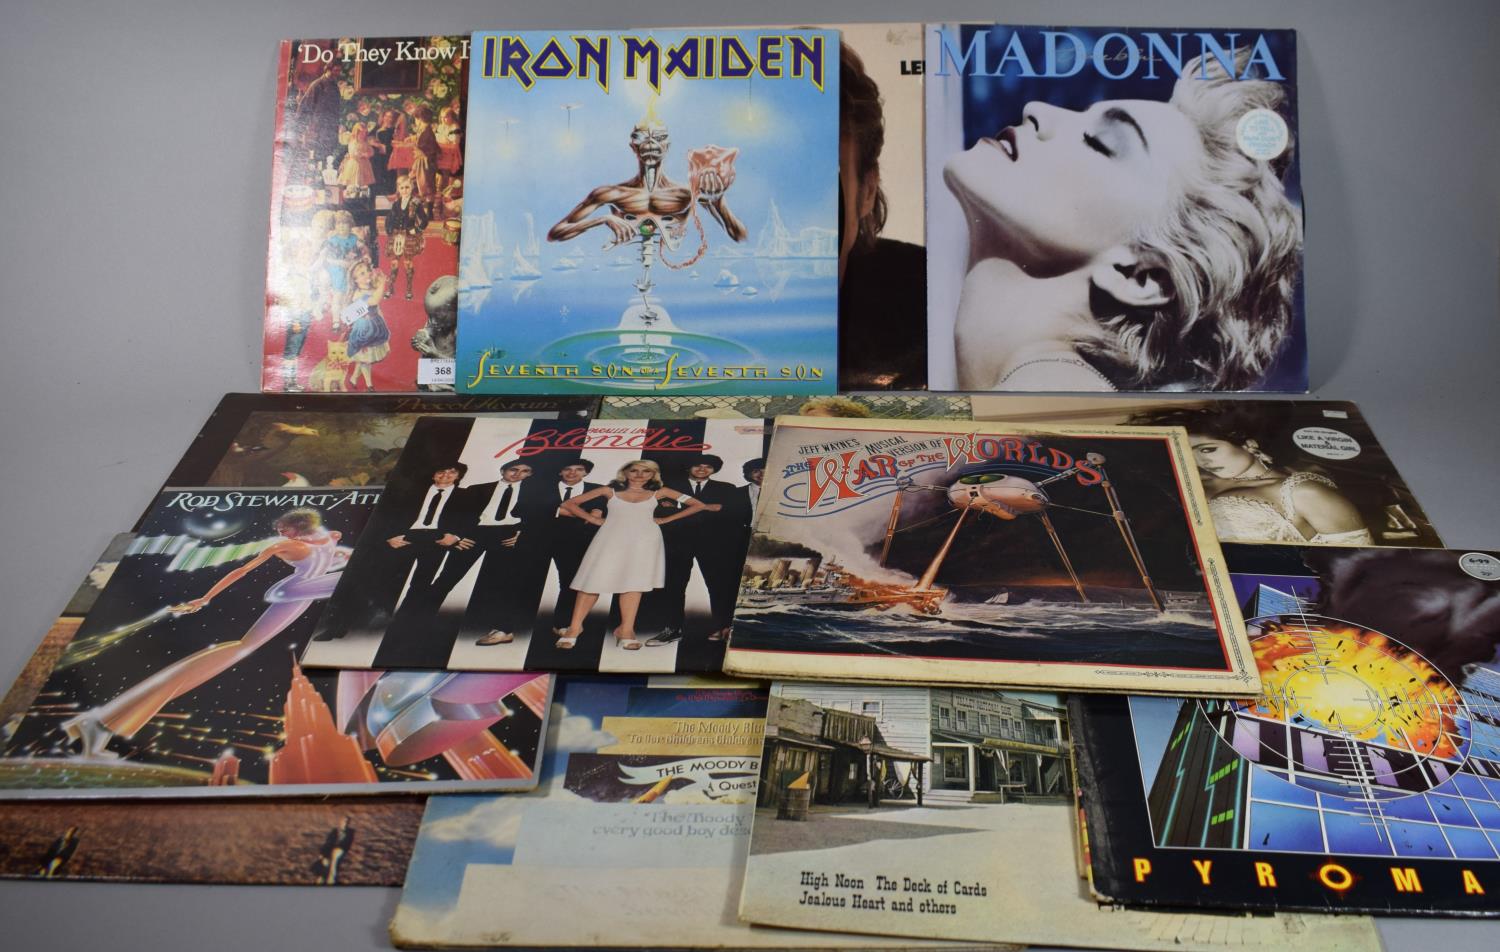 A Collection of 33rpm Records to Include Feed the World, John Lennon, Madonna, Simon and